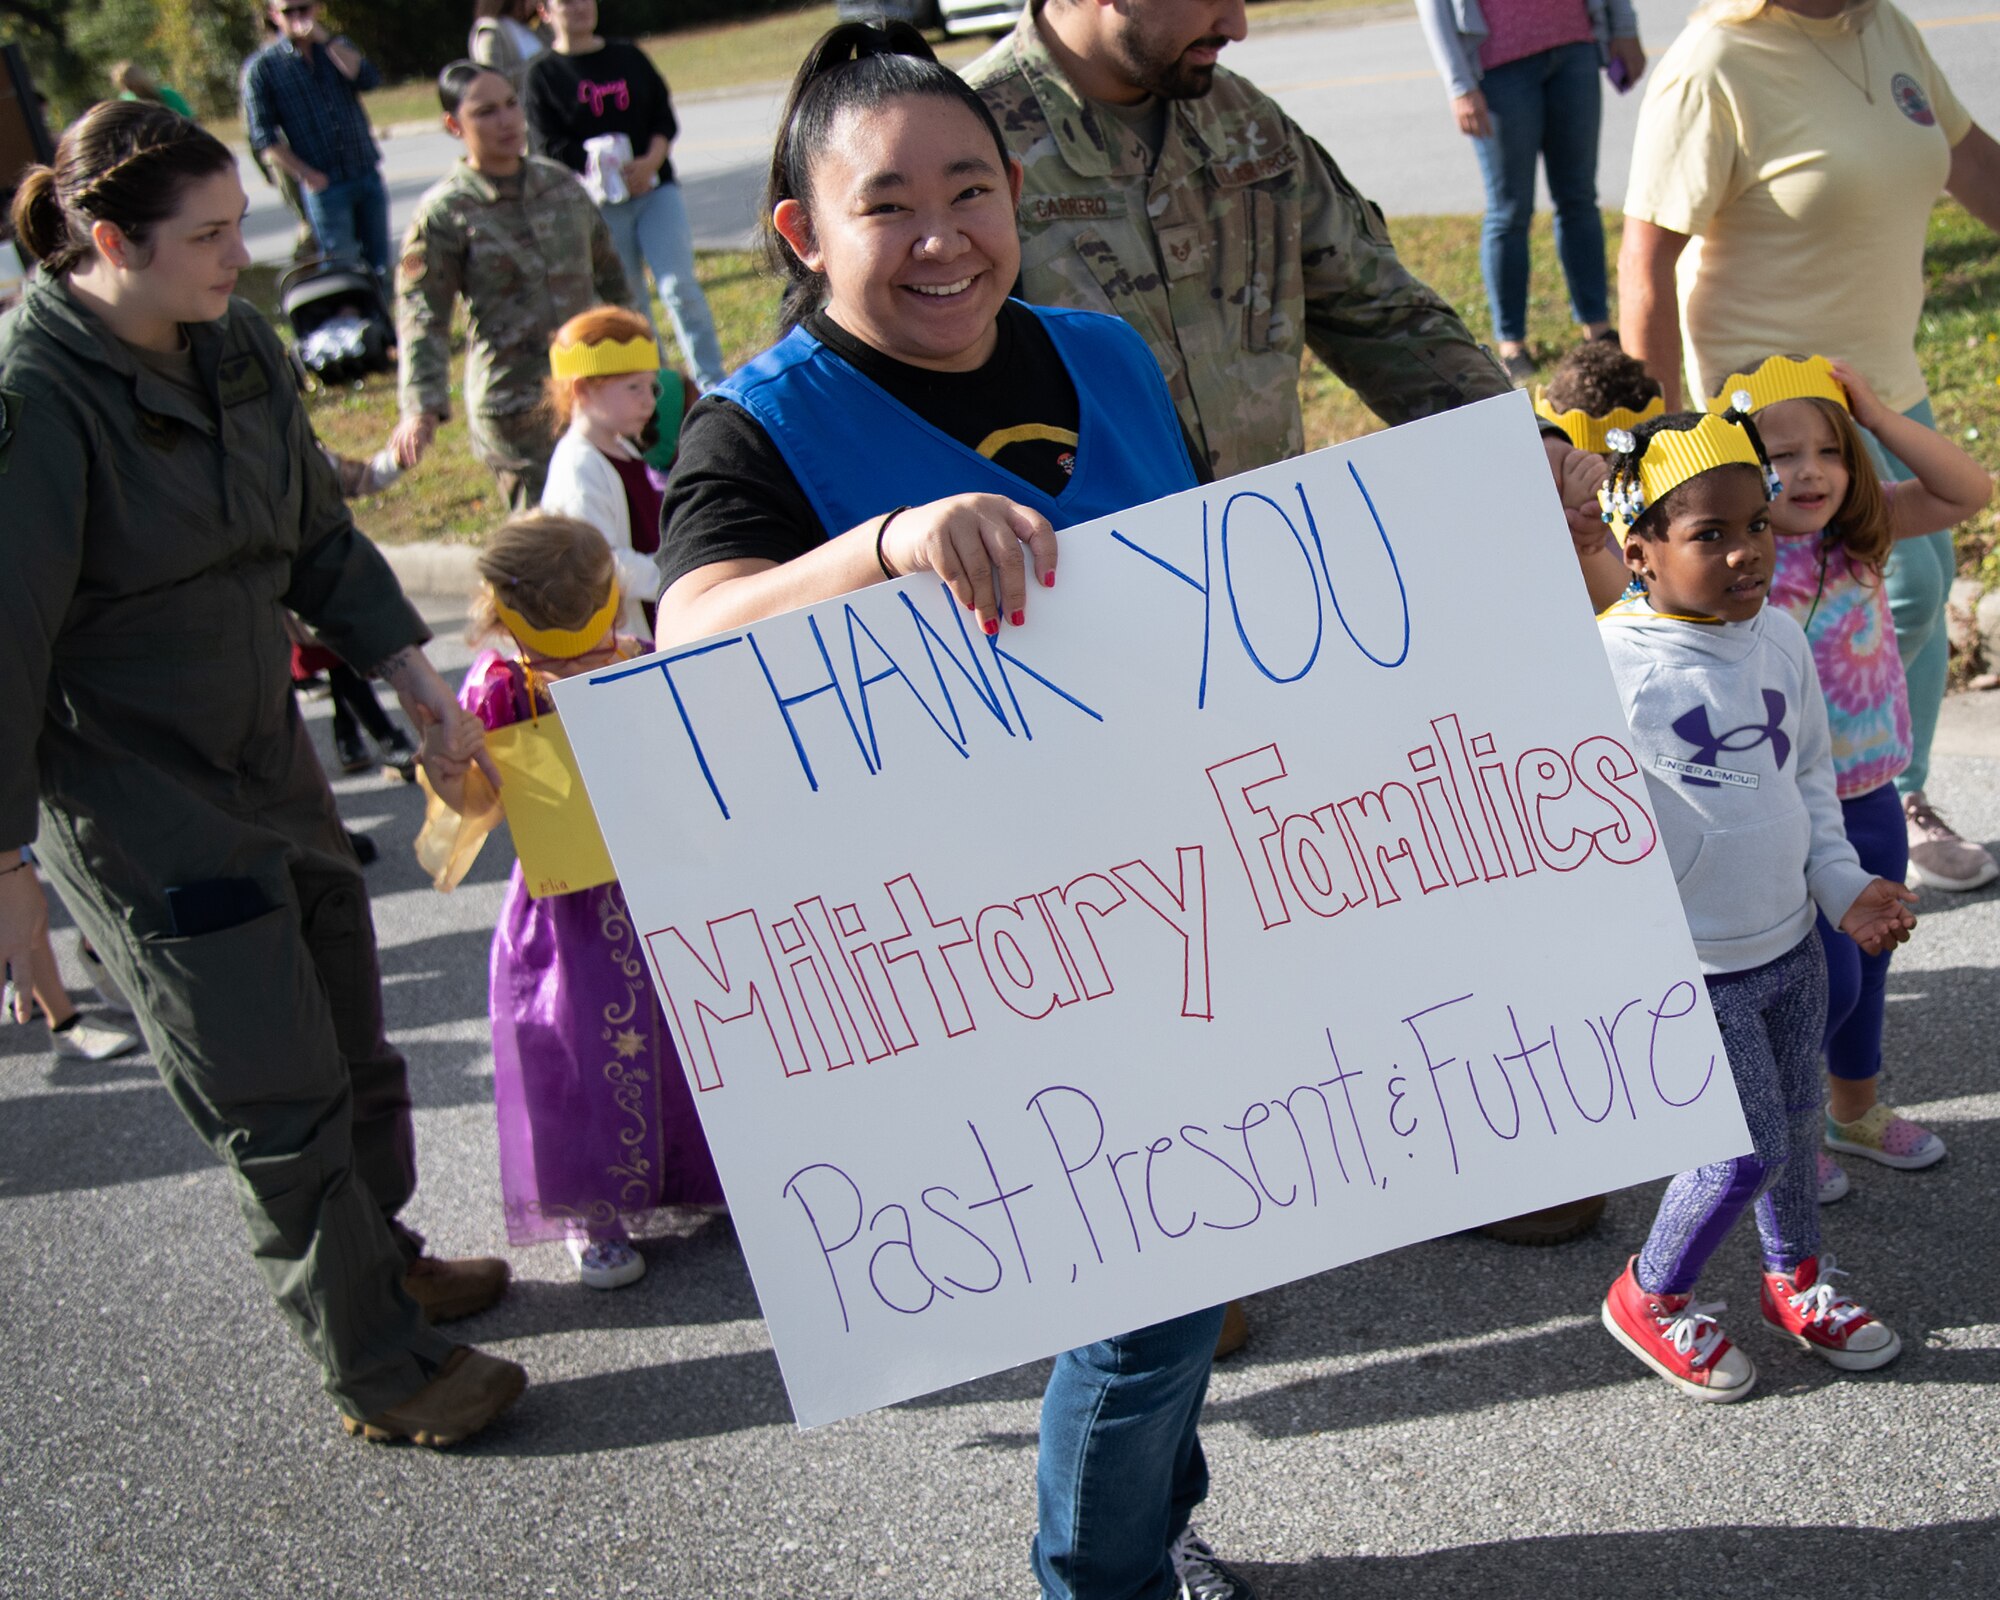 A woman holds a sign in a parade with kids.